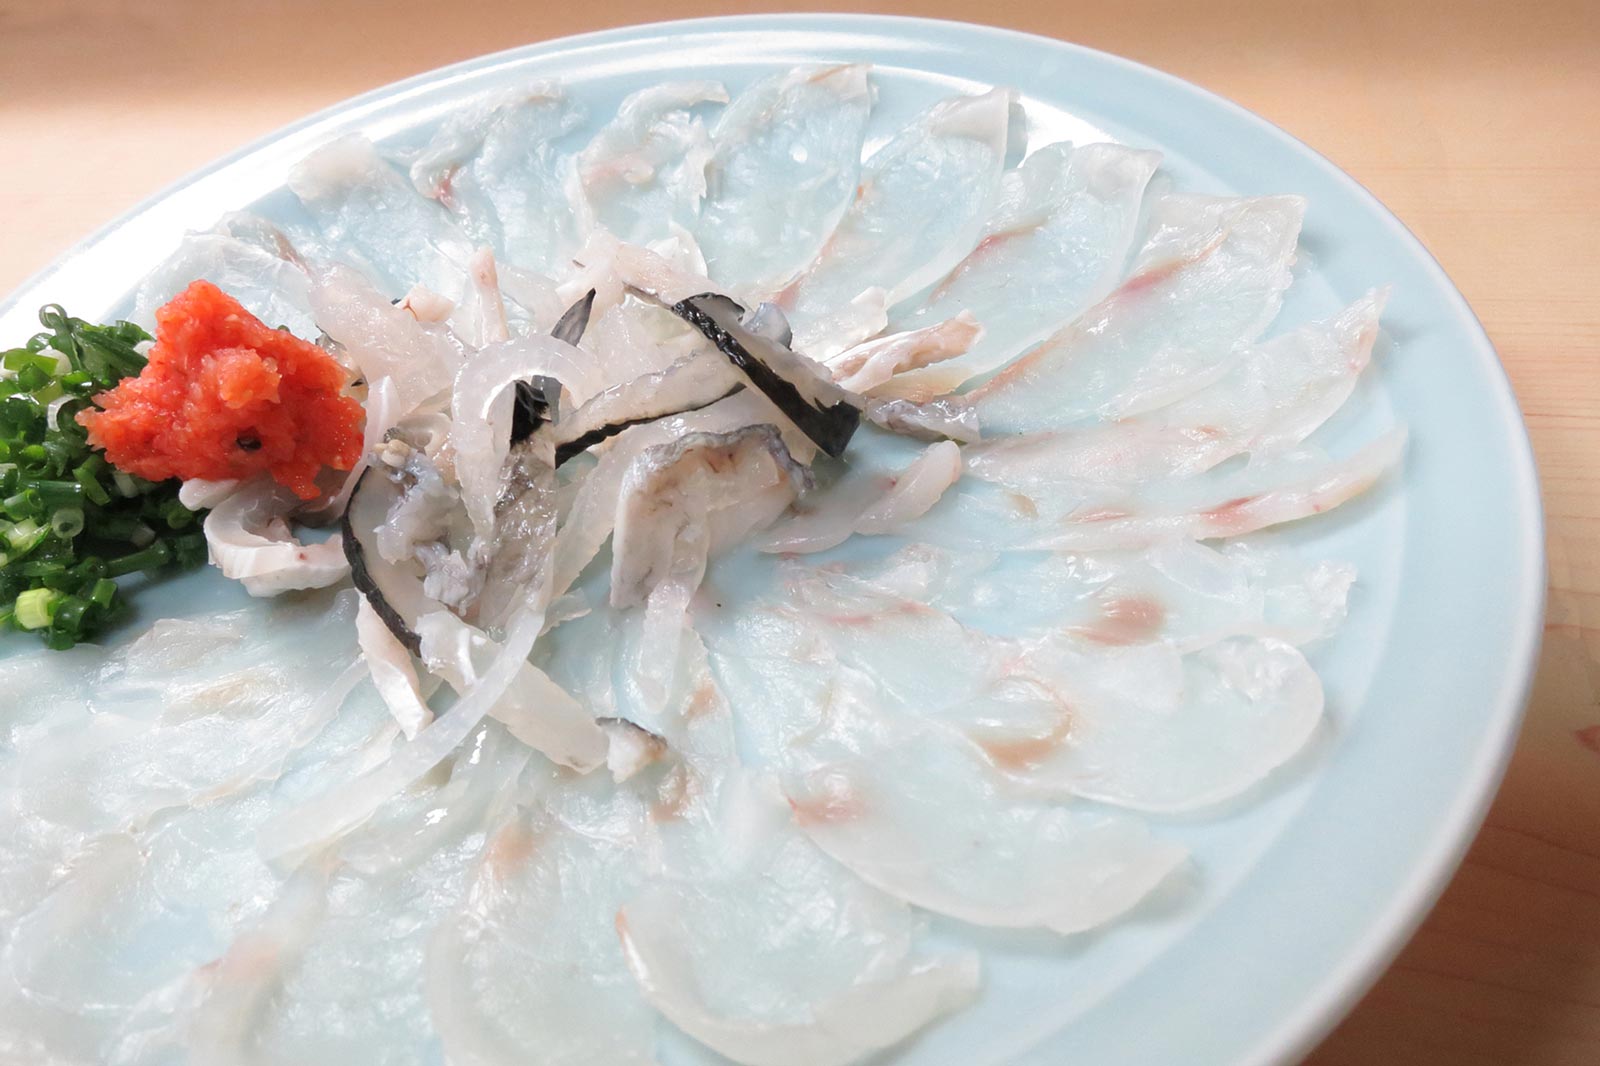 Only a Posh Person Will Have Eaten at Least 11/21 of These Foods Pufferfish